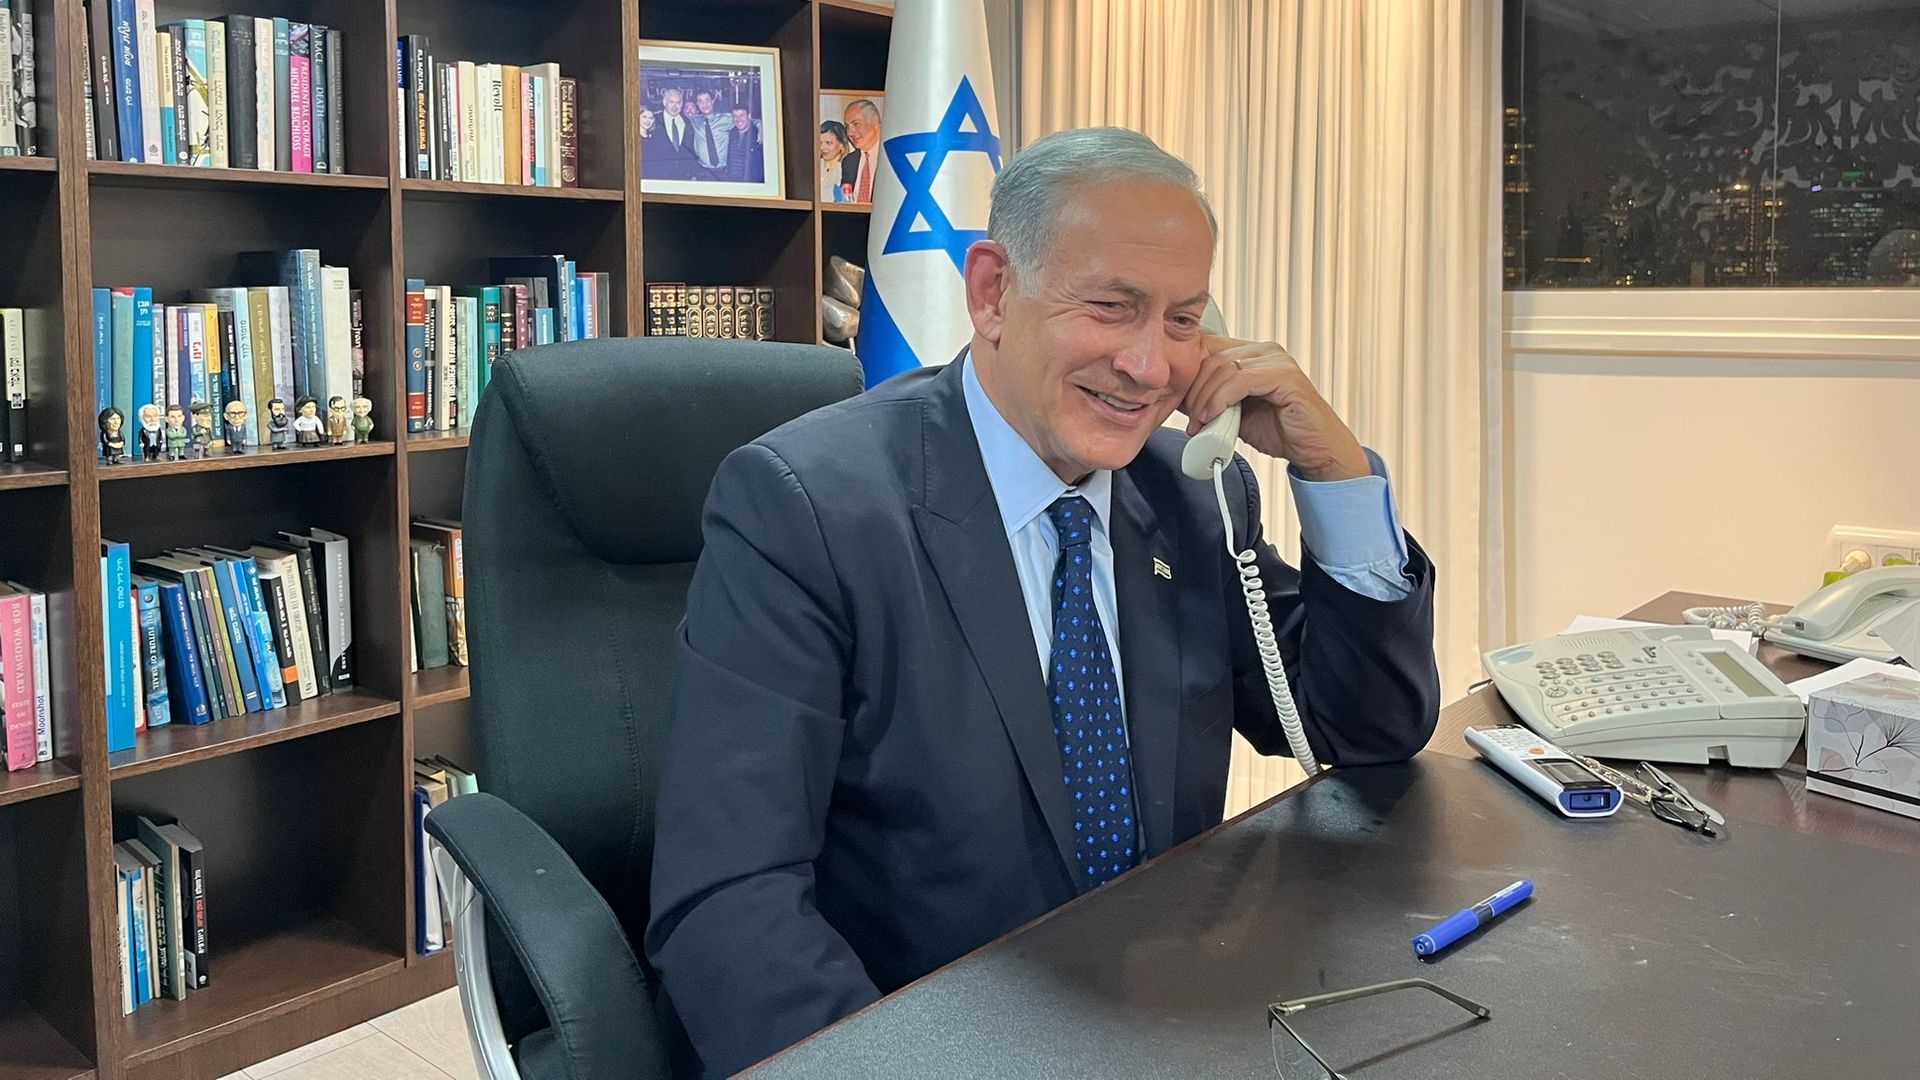 President Biden spoke on the phone with Benjamin Netanyahu and congratulated him for winning the Israeli elections